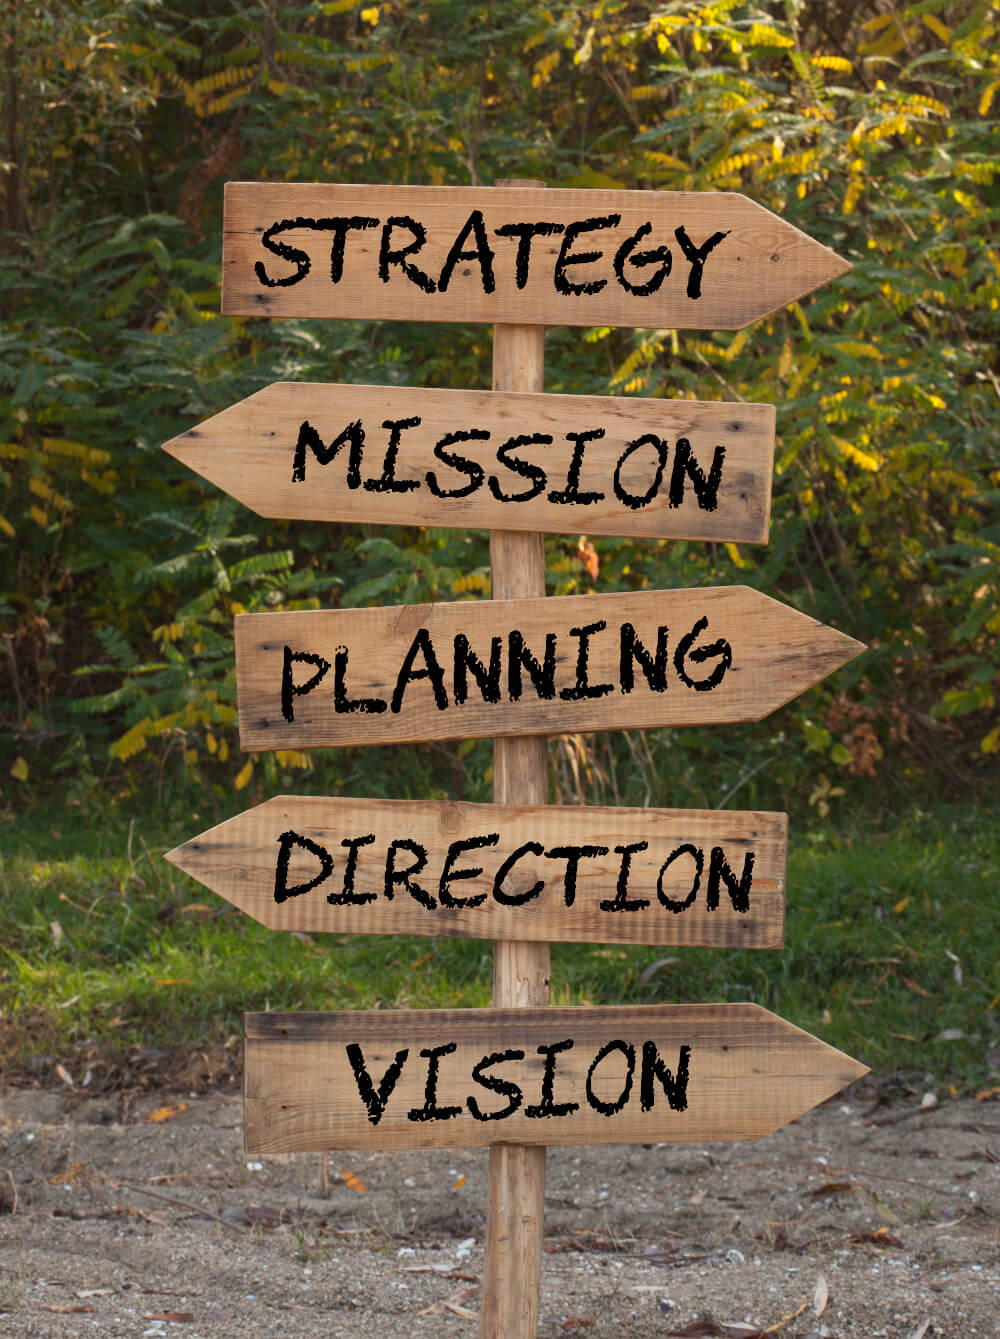 A vision statement is aspirational and focuses on long-term goals and where the company wants to be in the future. 